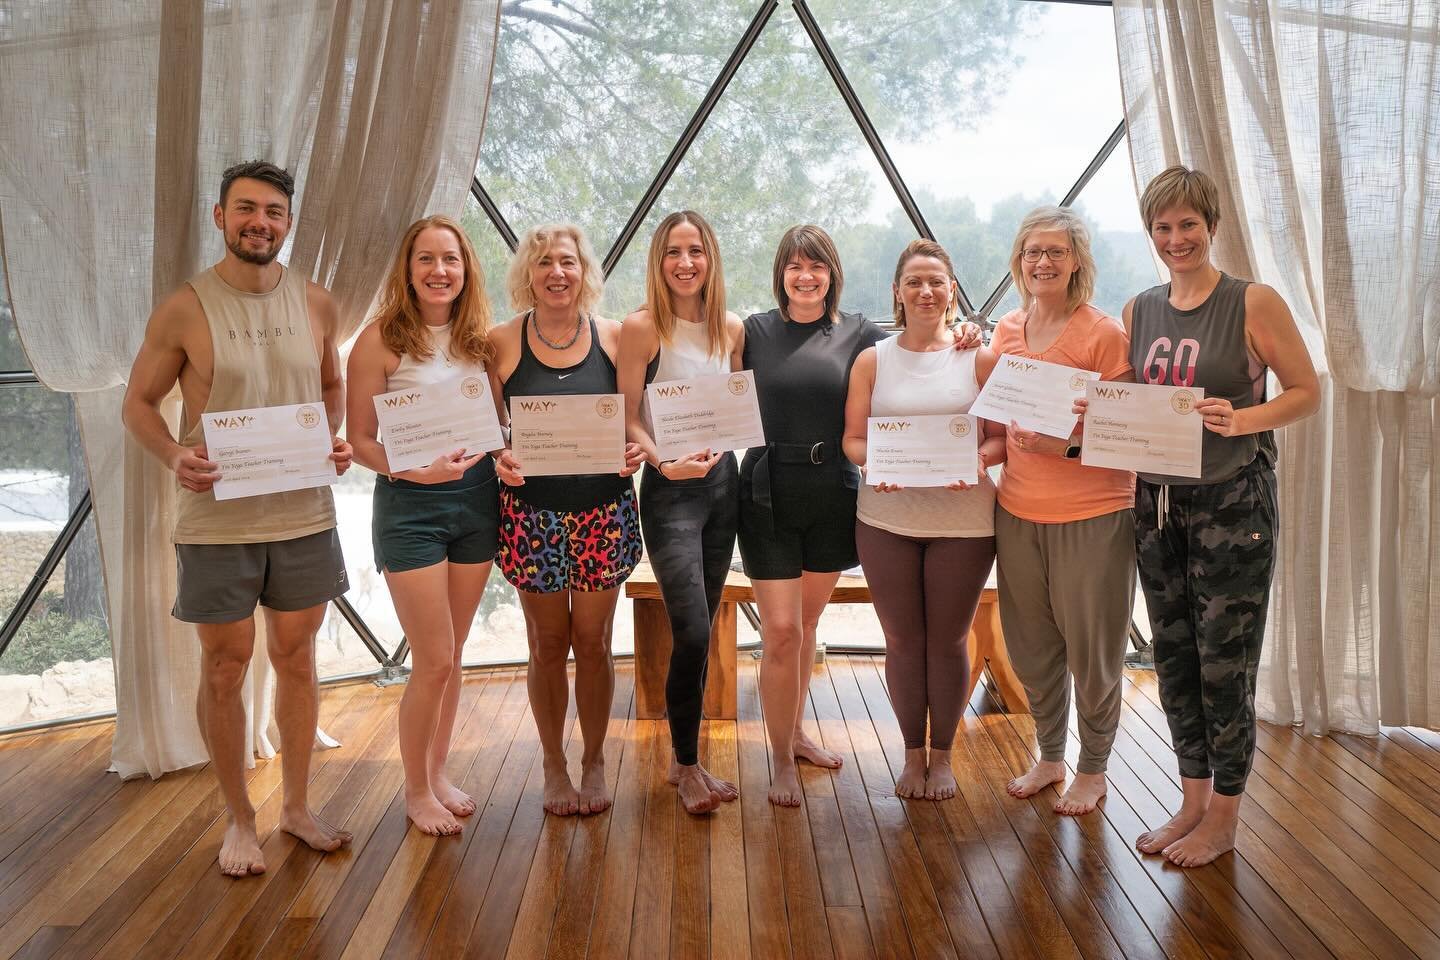 THE WAY
Overflowing with gratitude for these beautiful souls I&rsquo;ve been blessed to spend time with on this journey 💛

Your energy, vulnerability, and support for one another has made this inaugural Yin Yoga Training Retreat in Ibiza truly unfor